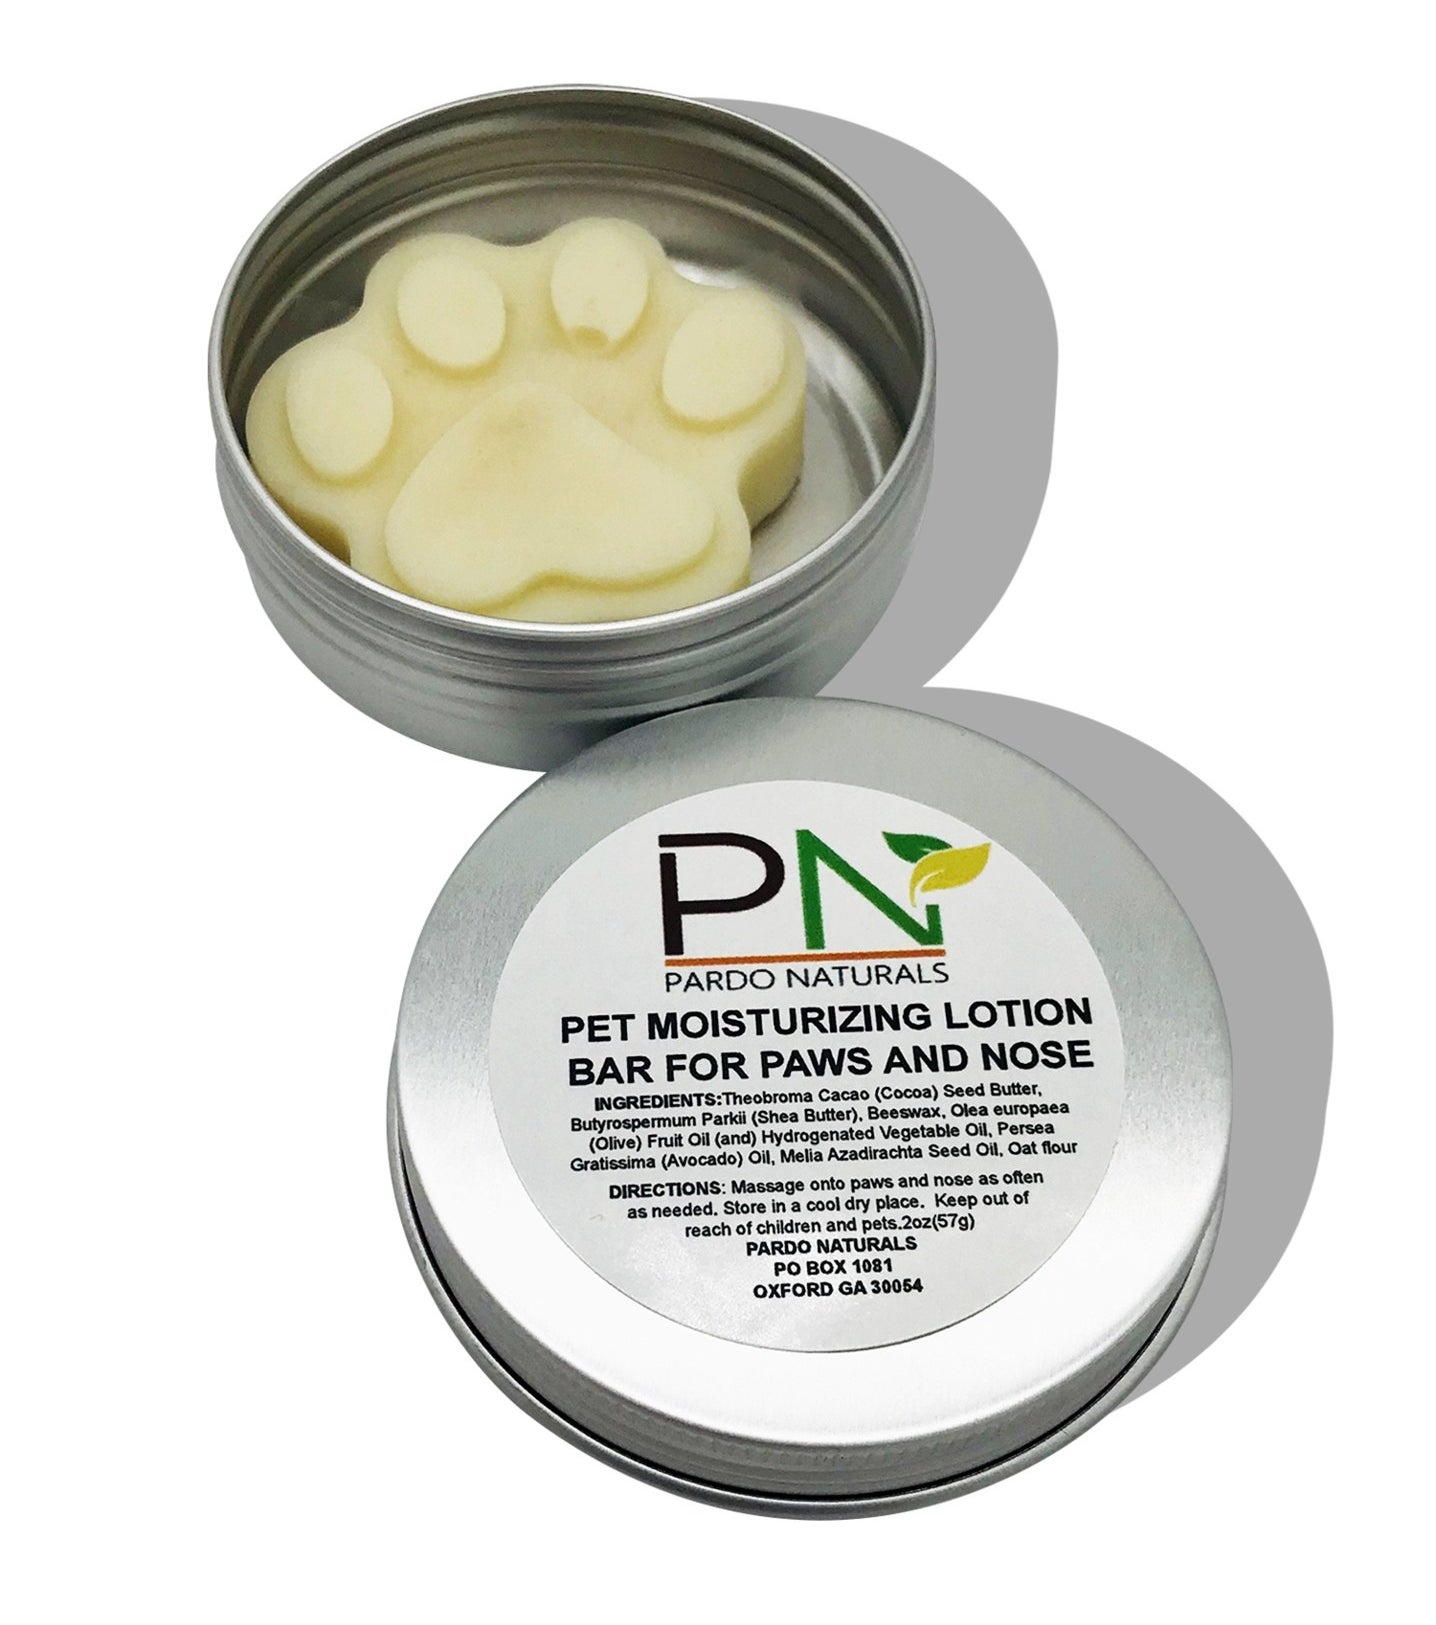 The moisturizing paw and noise lotion bar